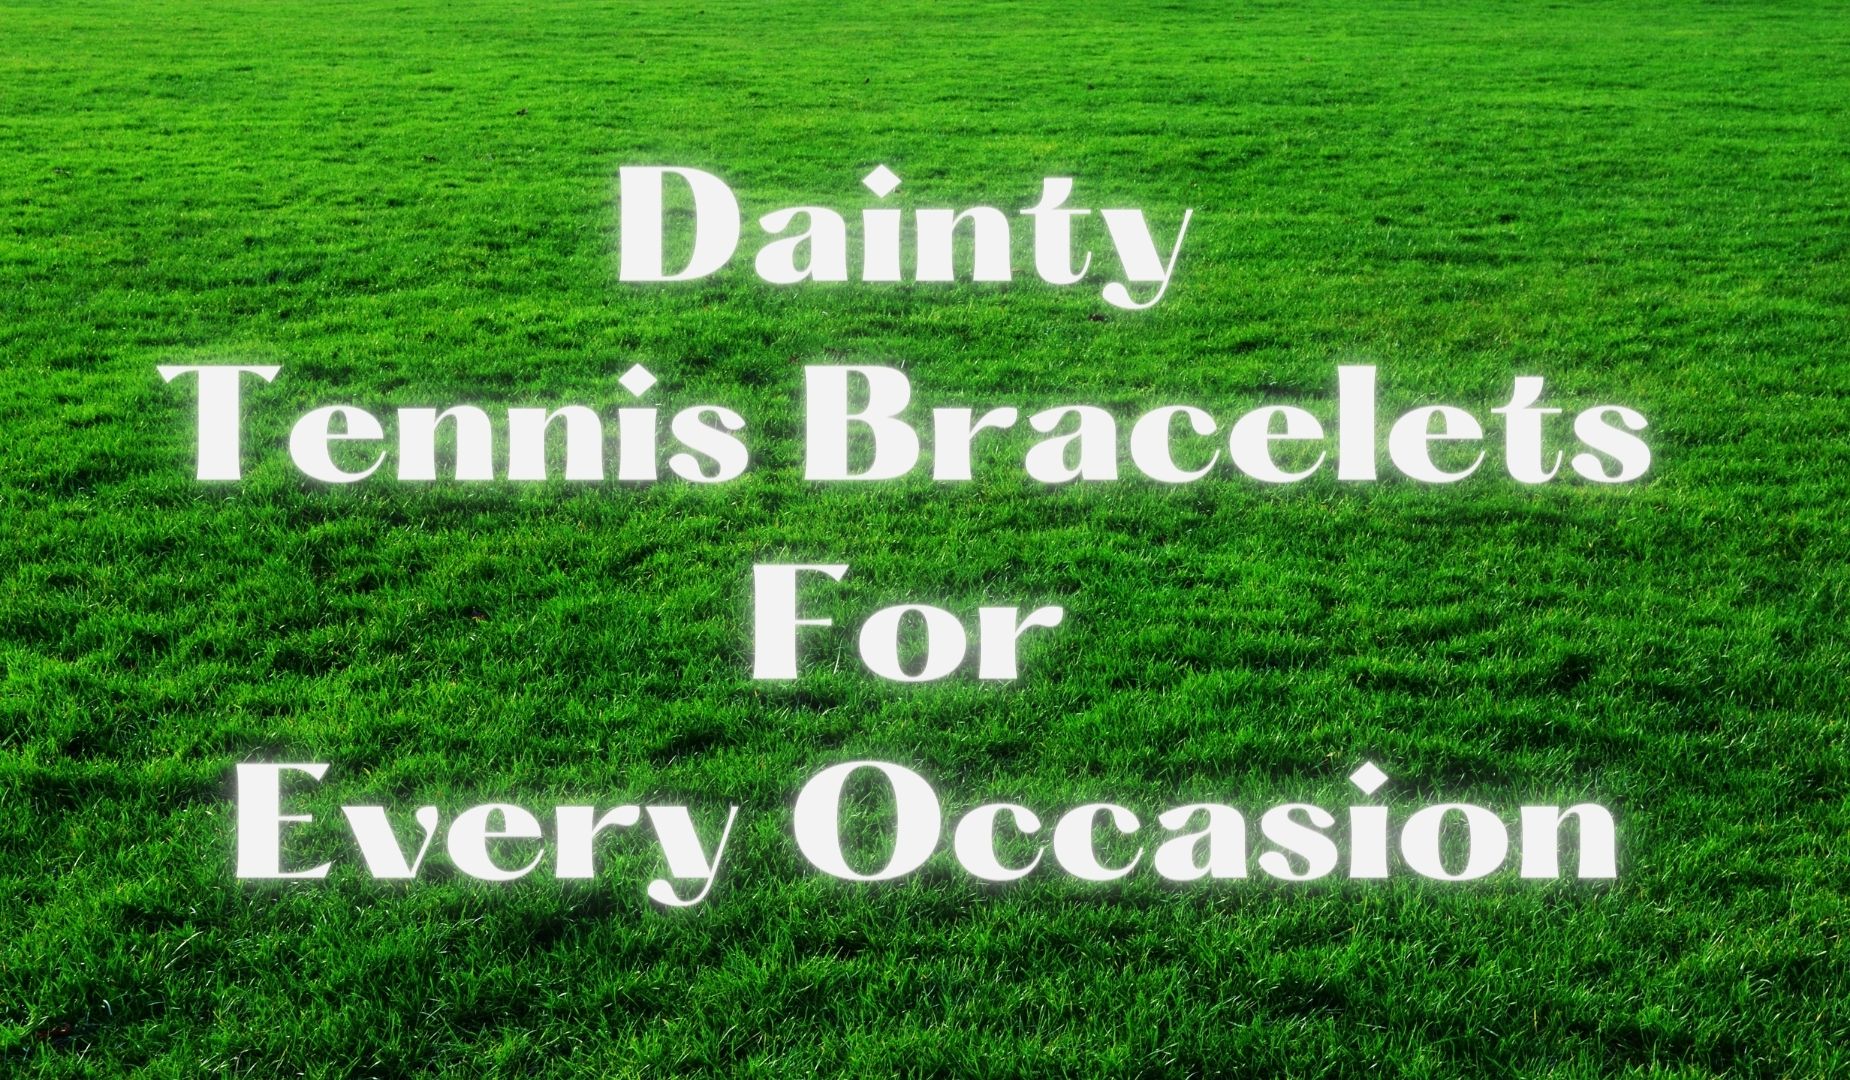 Dainty Tennis Bracelets for Every Occasion